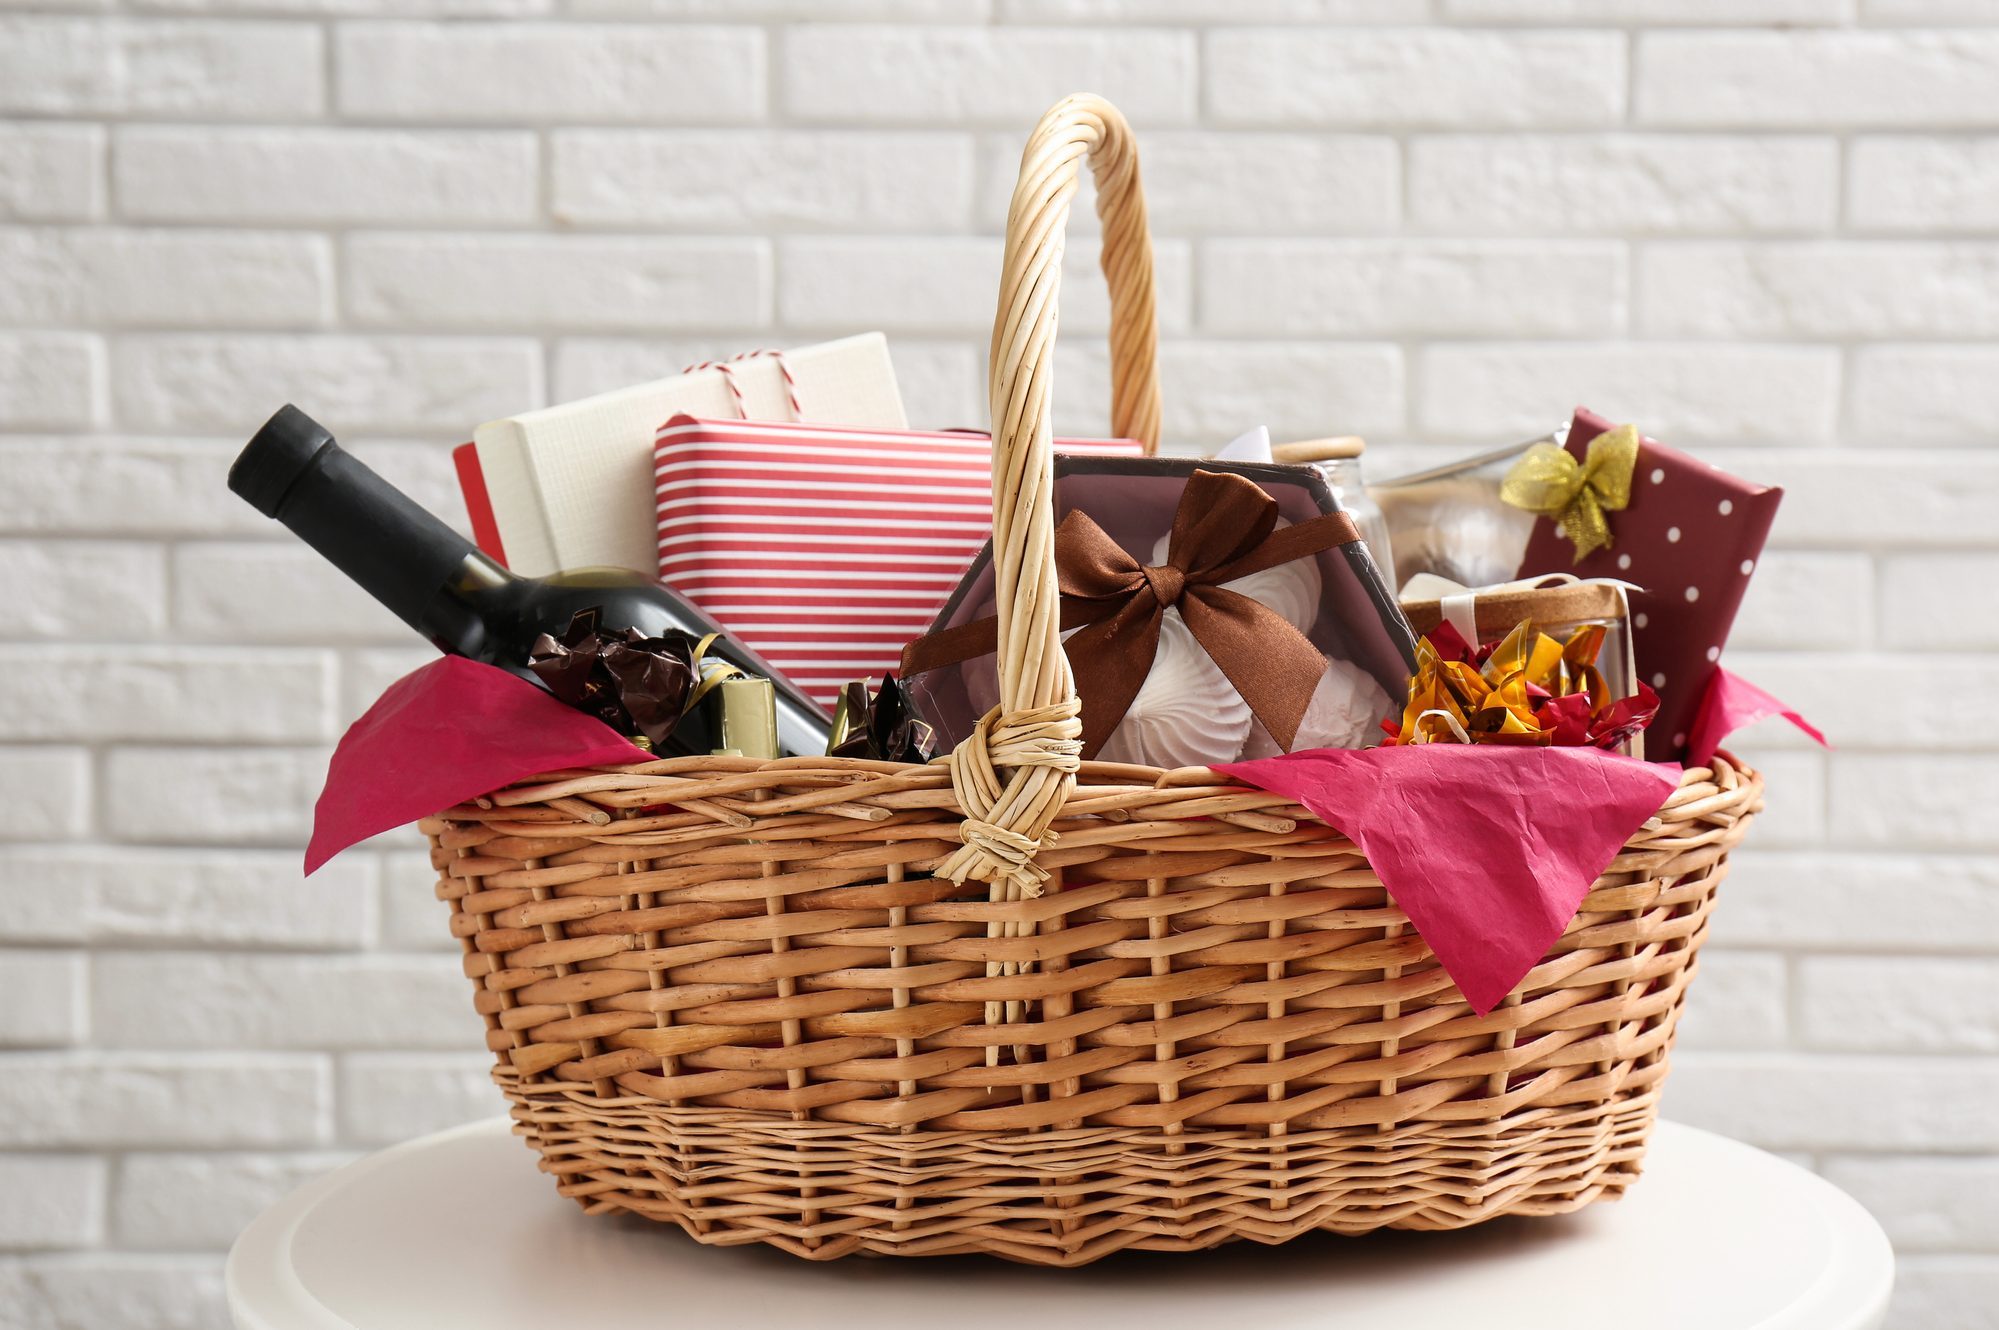 Wicker gift basket with bottle of wine on table near white brick wall